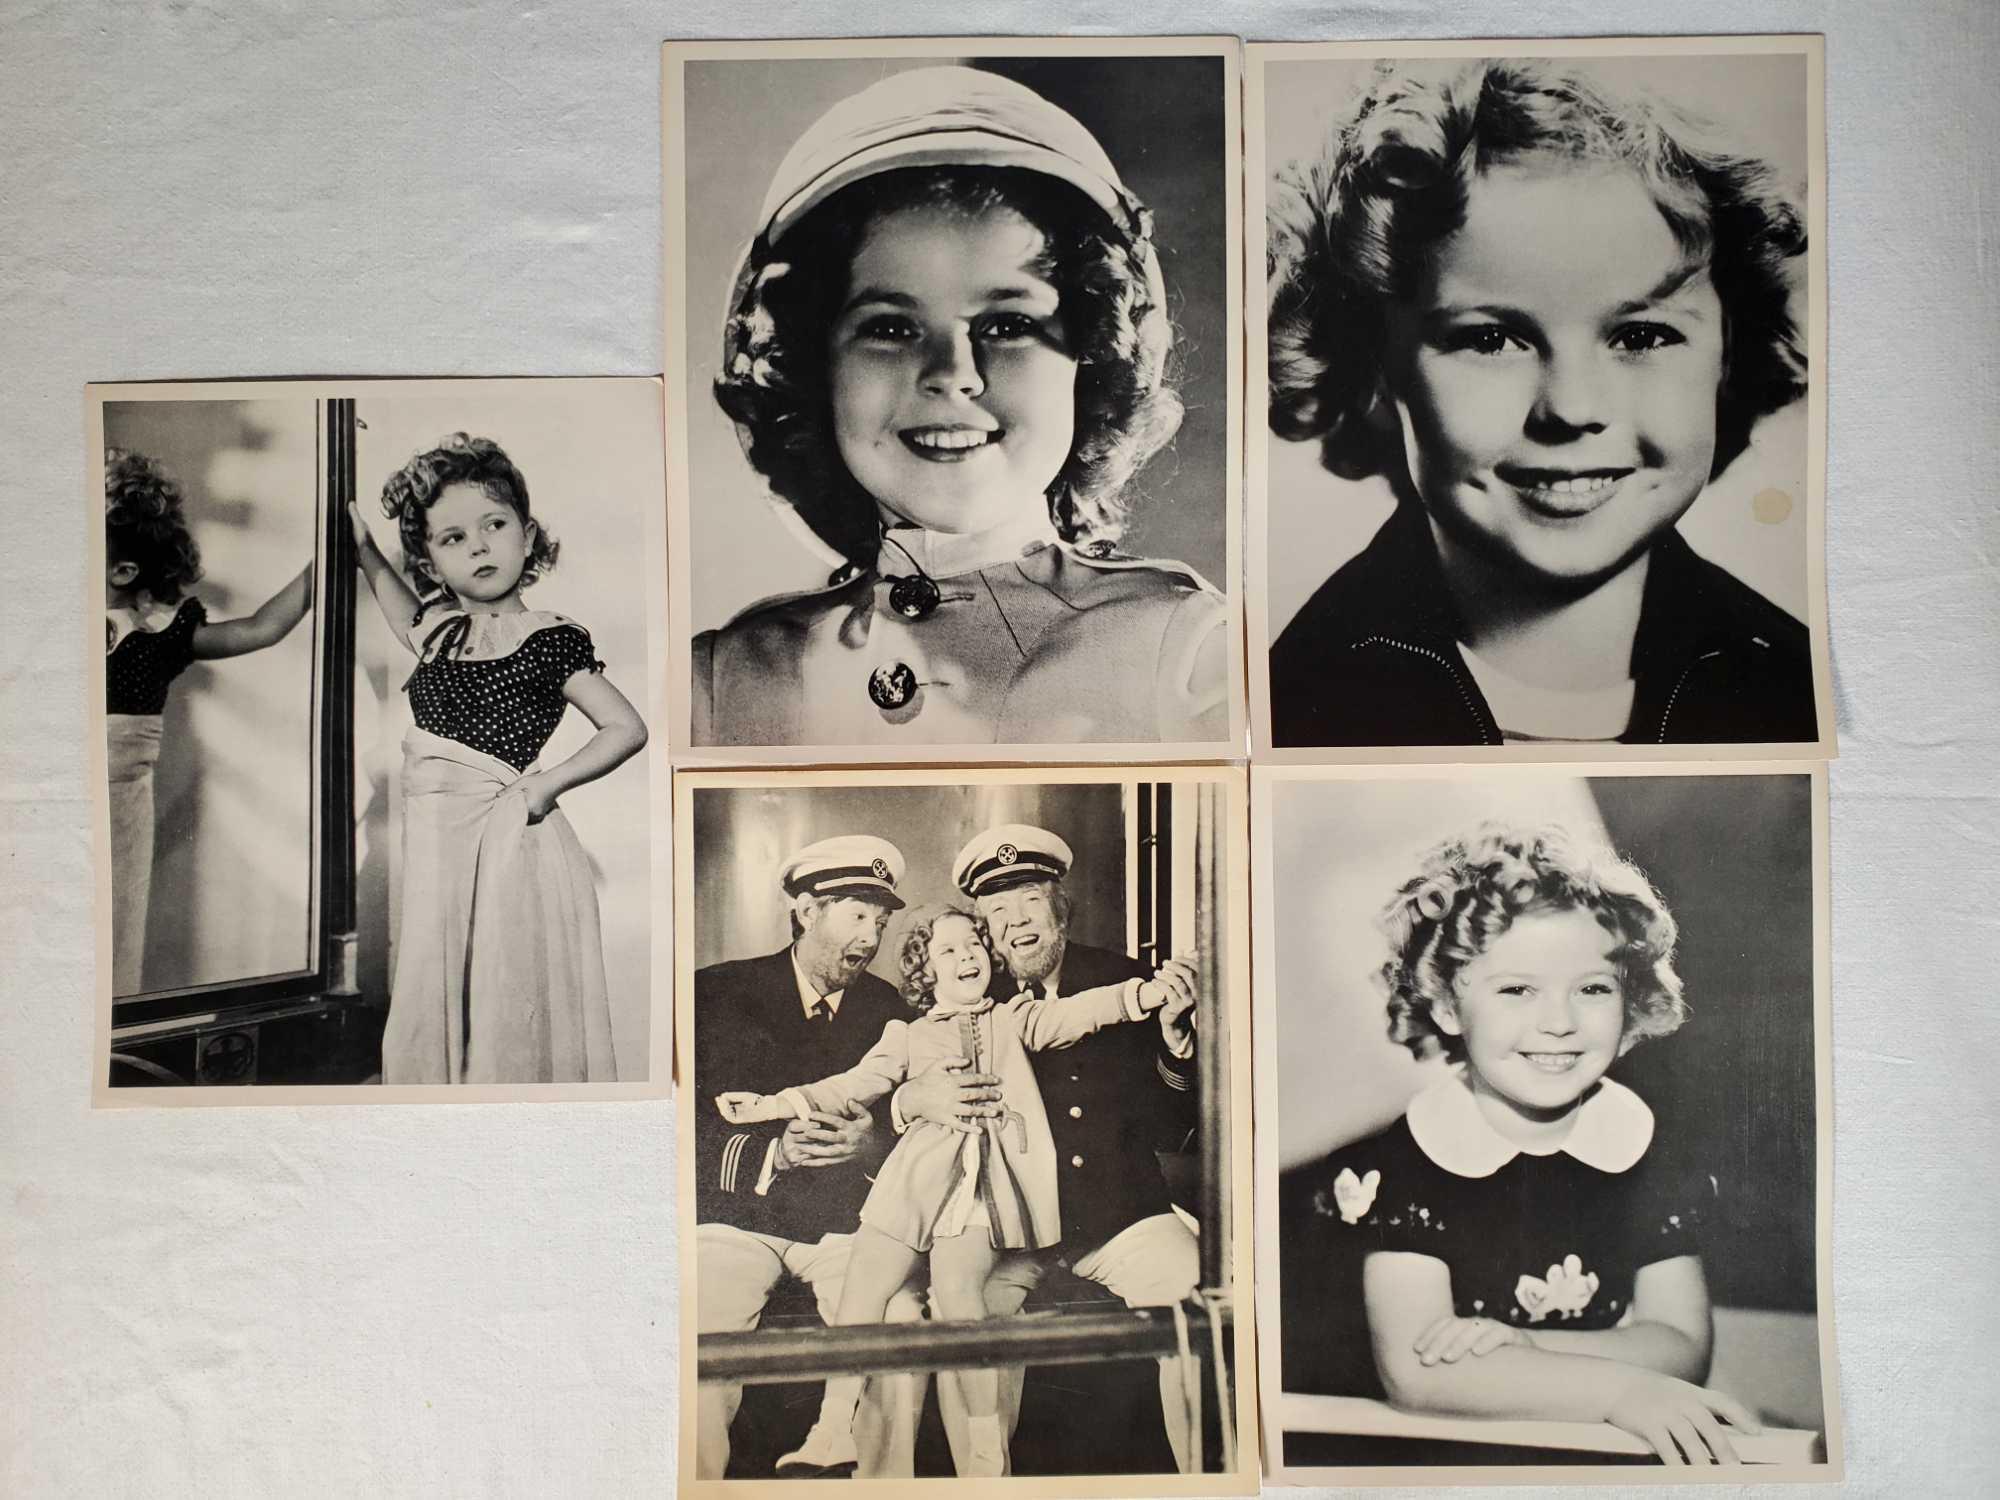 Shirley Temple Collection with Dollls Plates and Photos